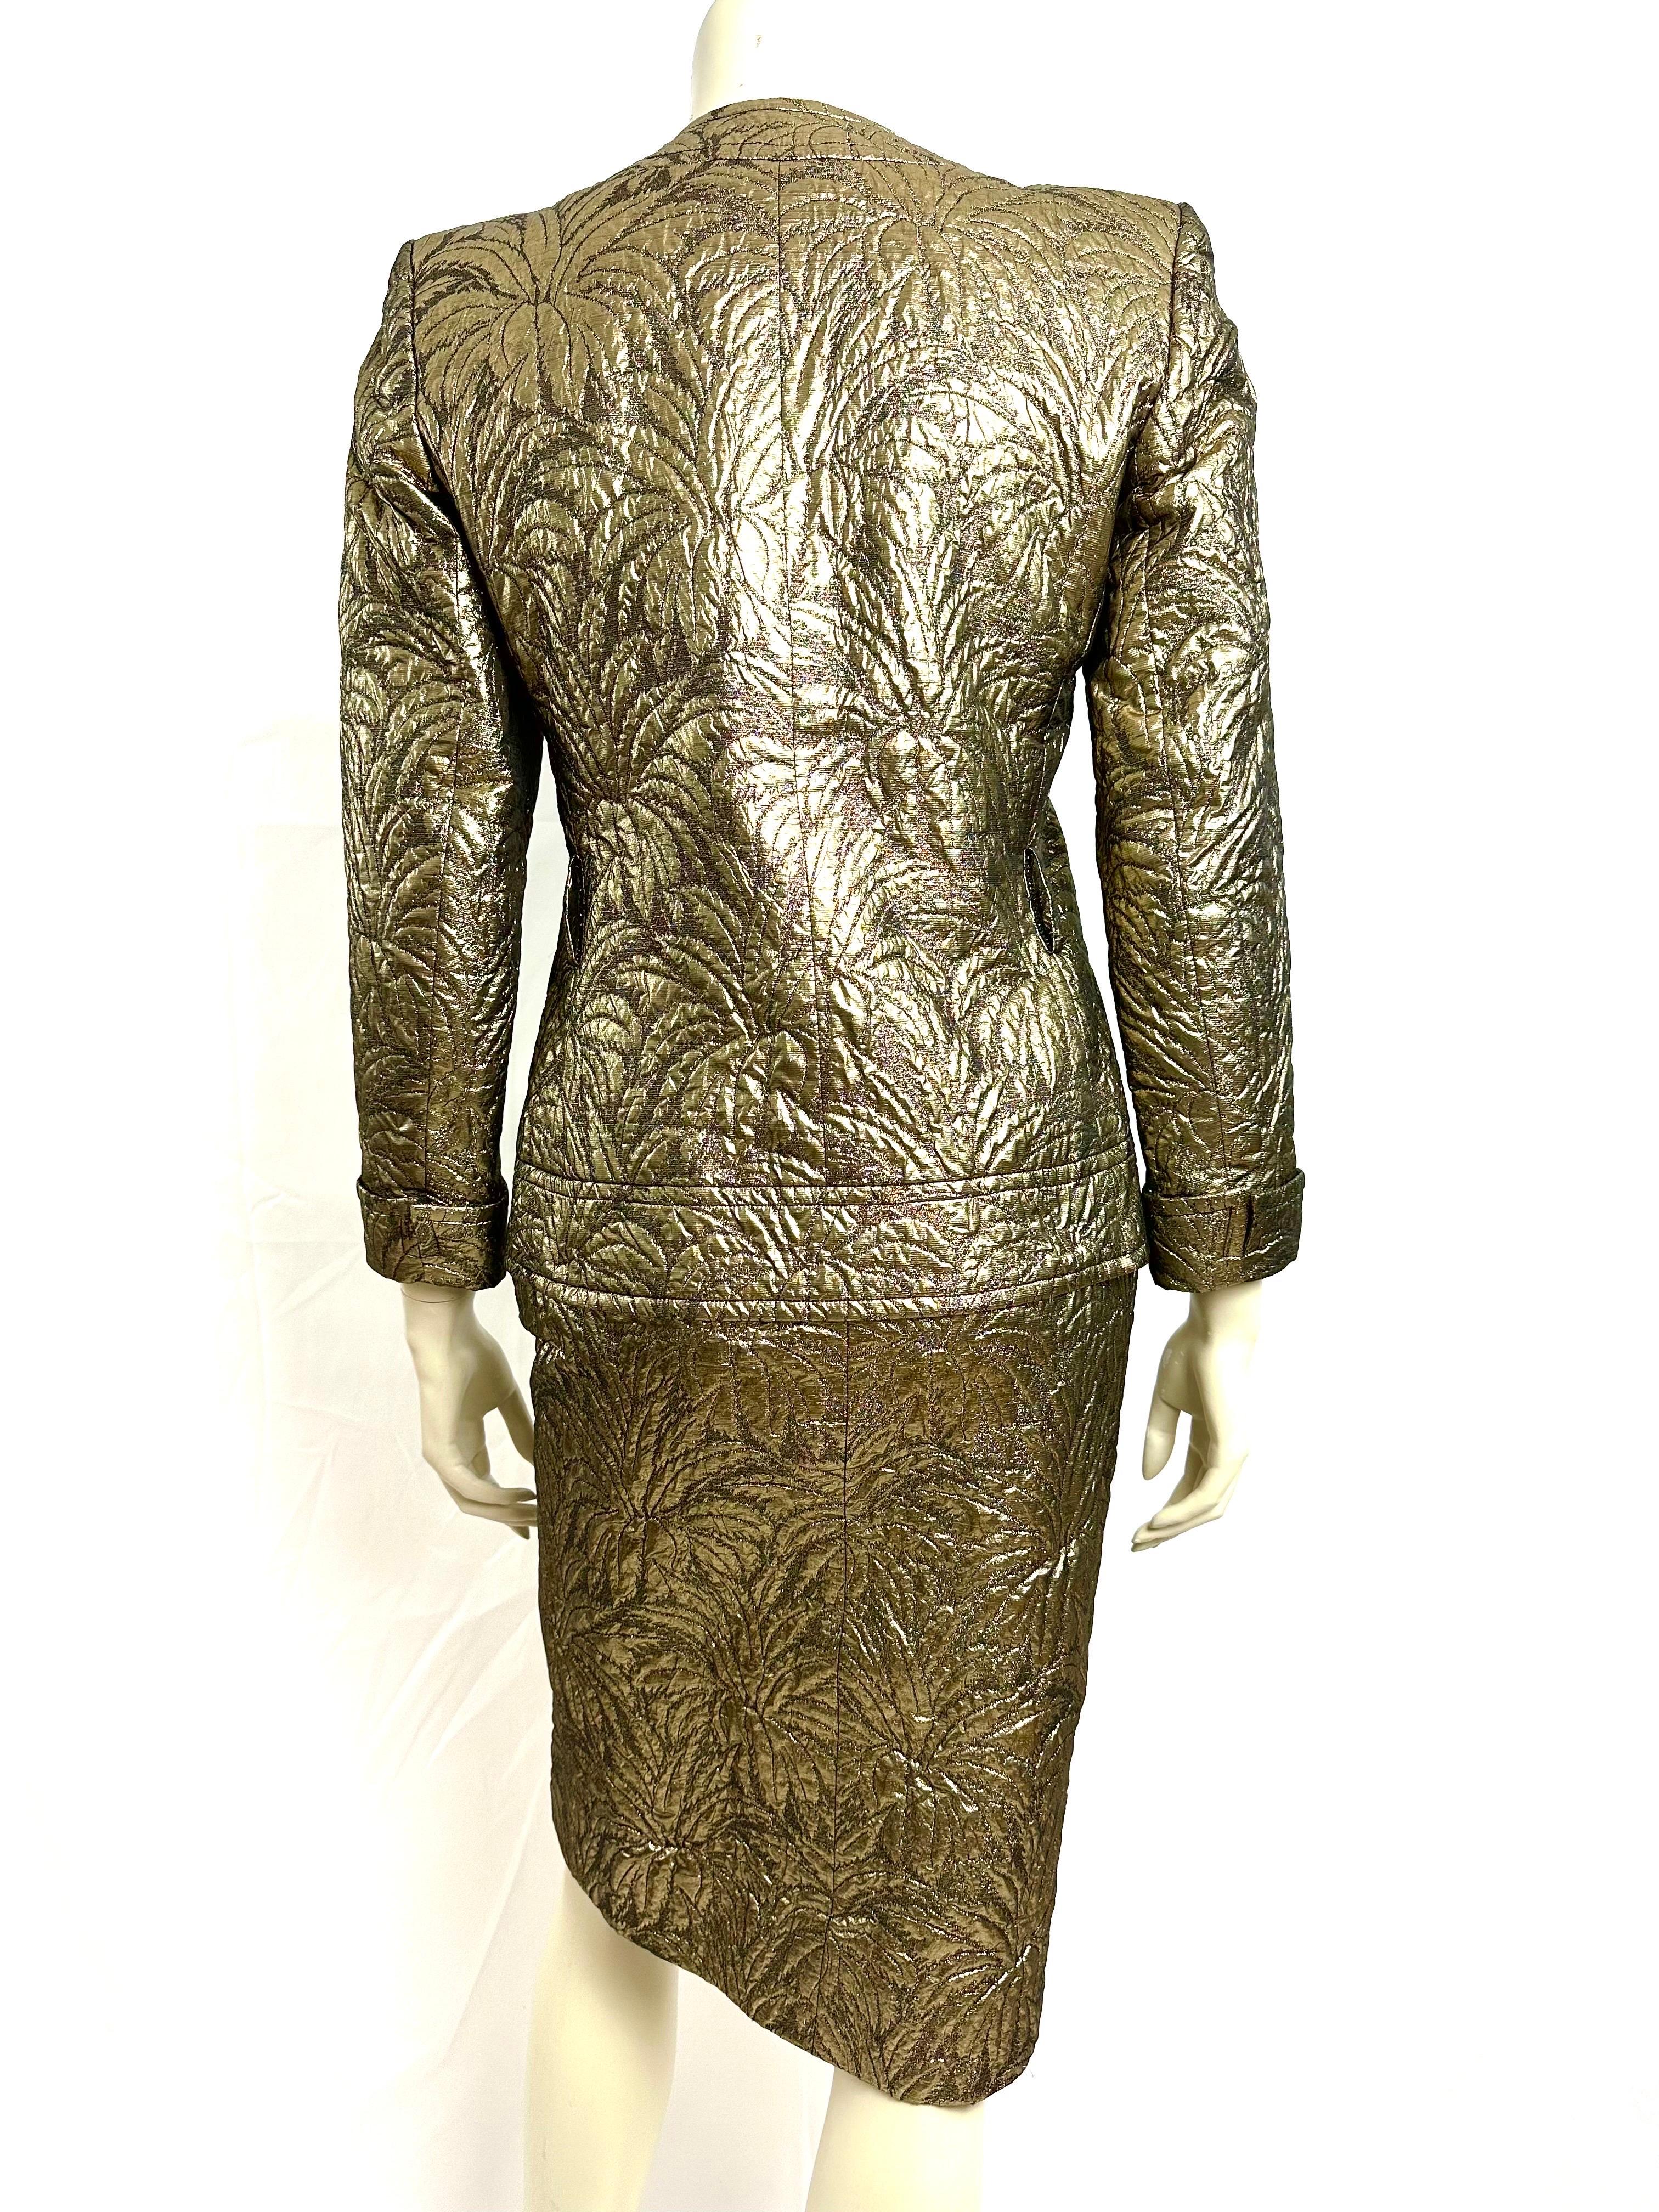 YSL Yves saint Laurent gold brocade skirt suit F/W 86 For Sale 6